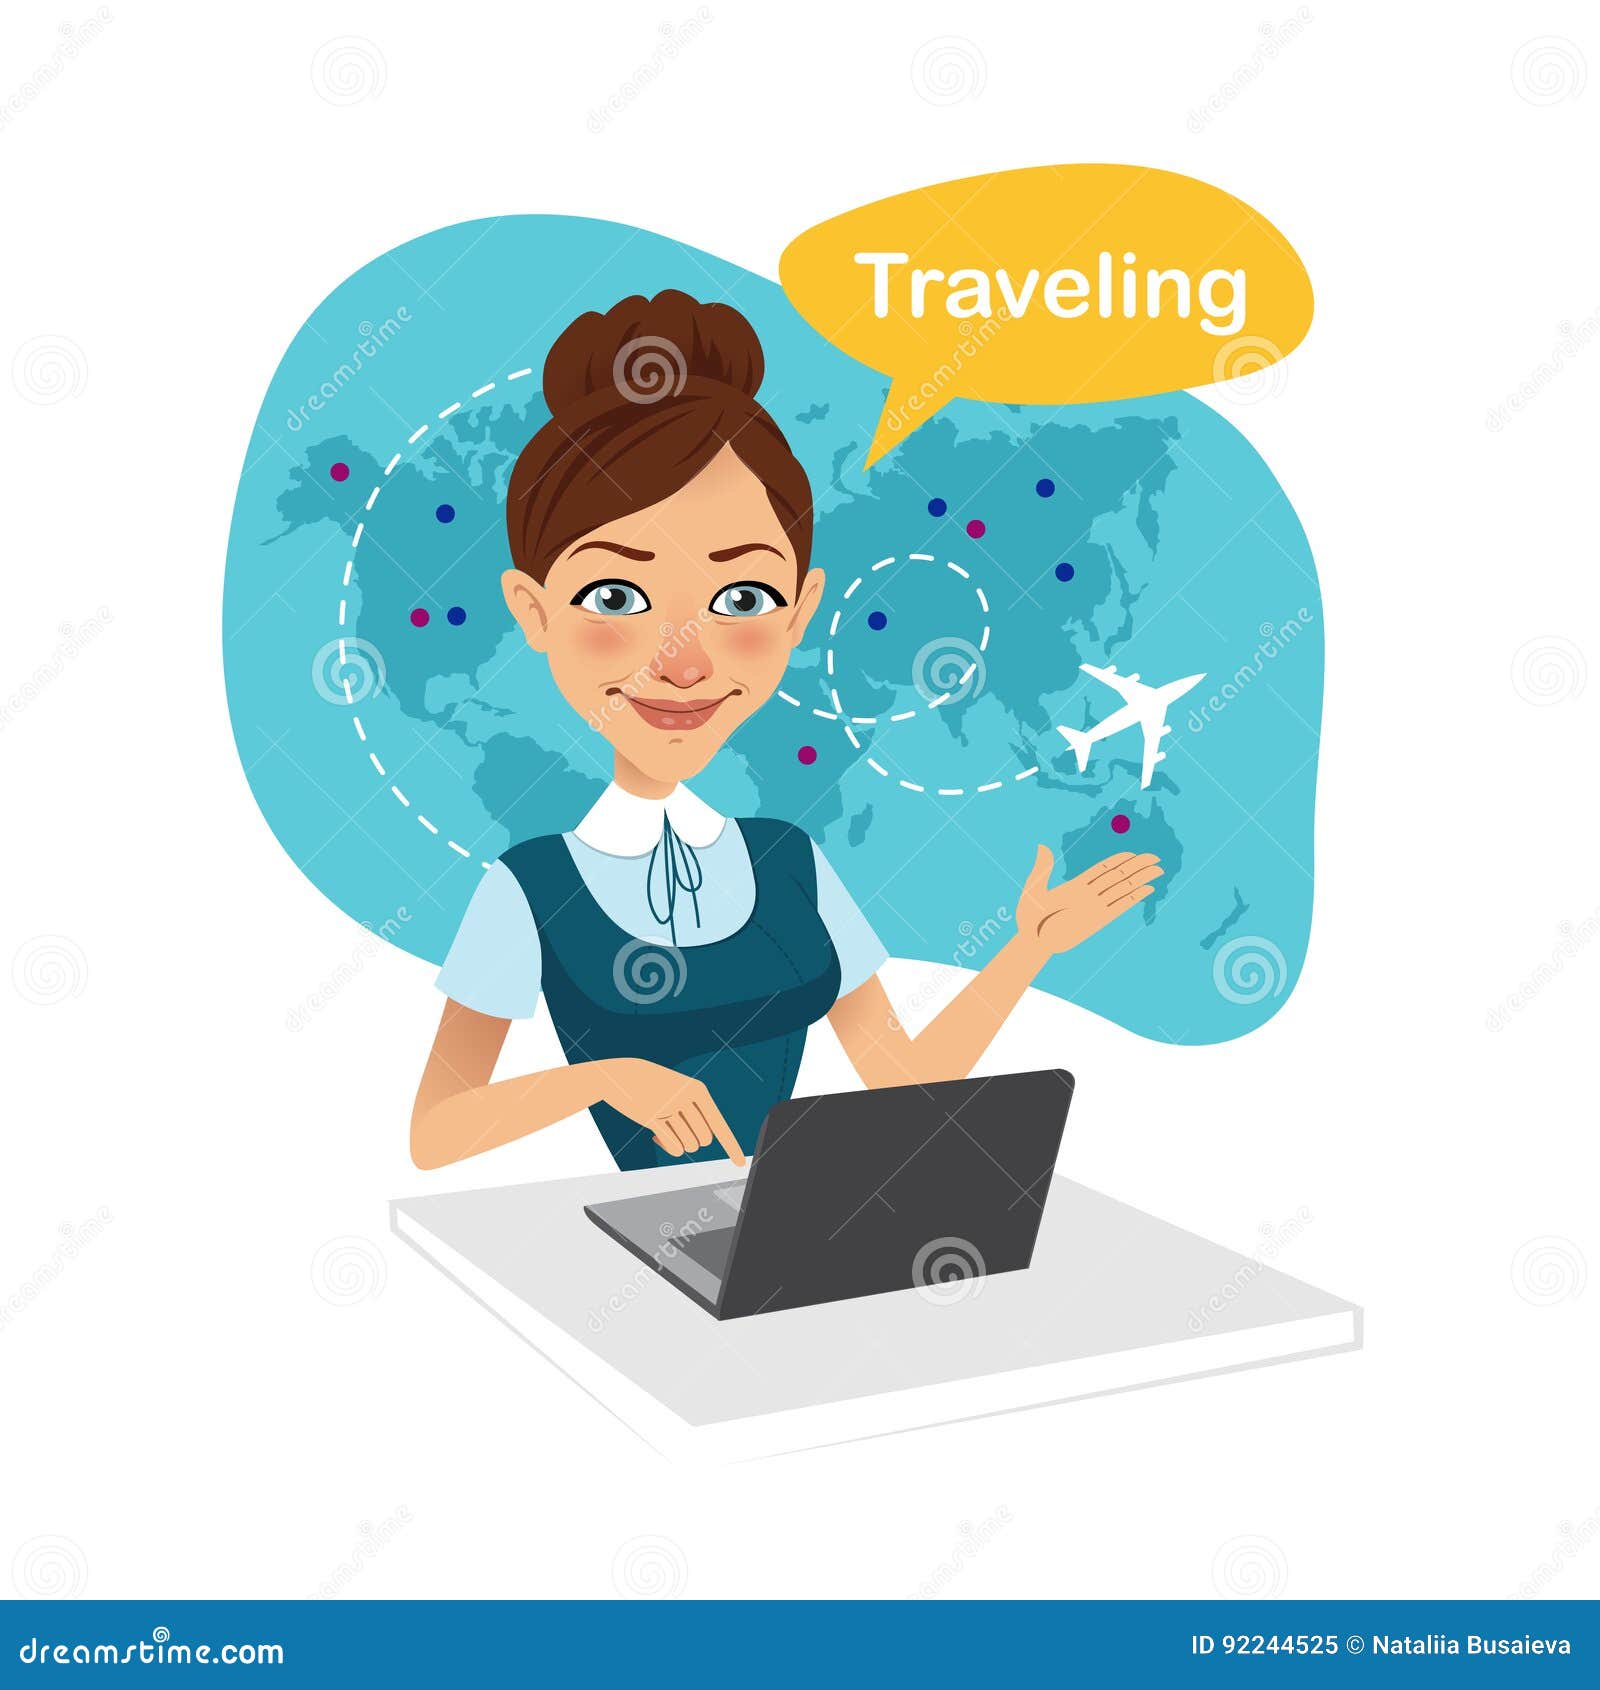 Travel Agency Banner. Woman Sitting at Table in Office. Travel Agent  Working for Laptop Stock Vector - Illustration of tourism, international:  92244525